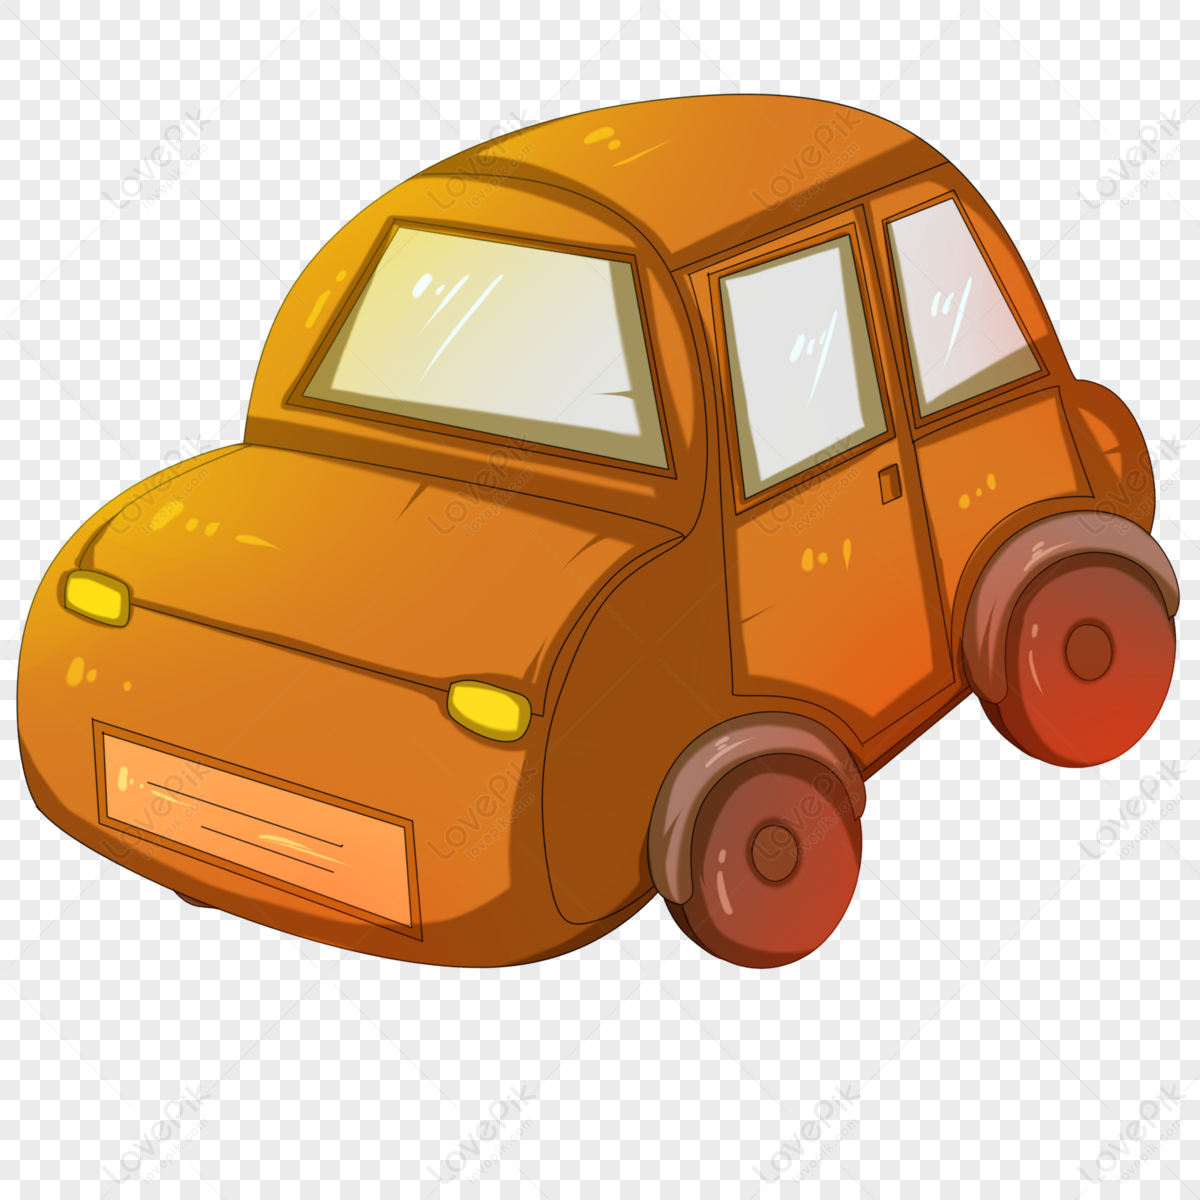 Car Painter Vector Images (over 4,600)